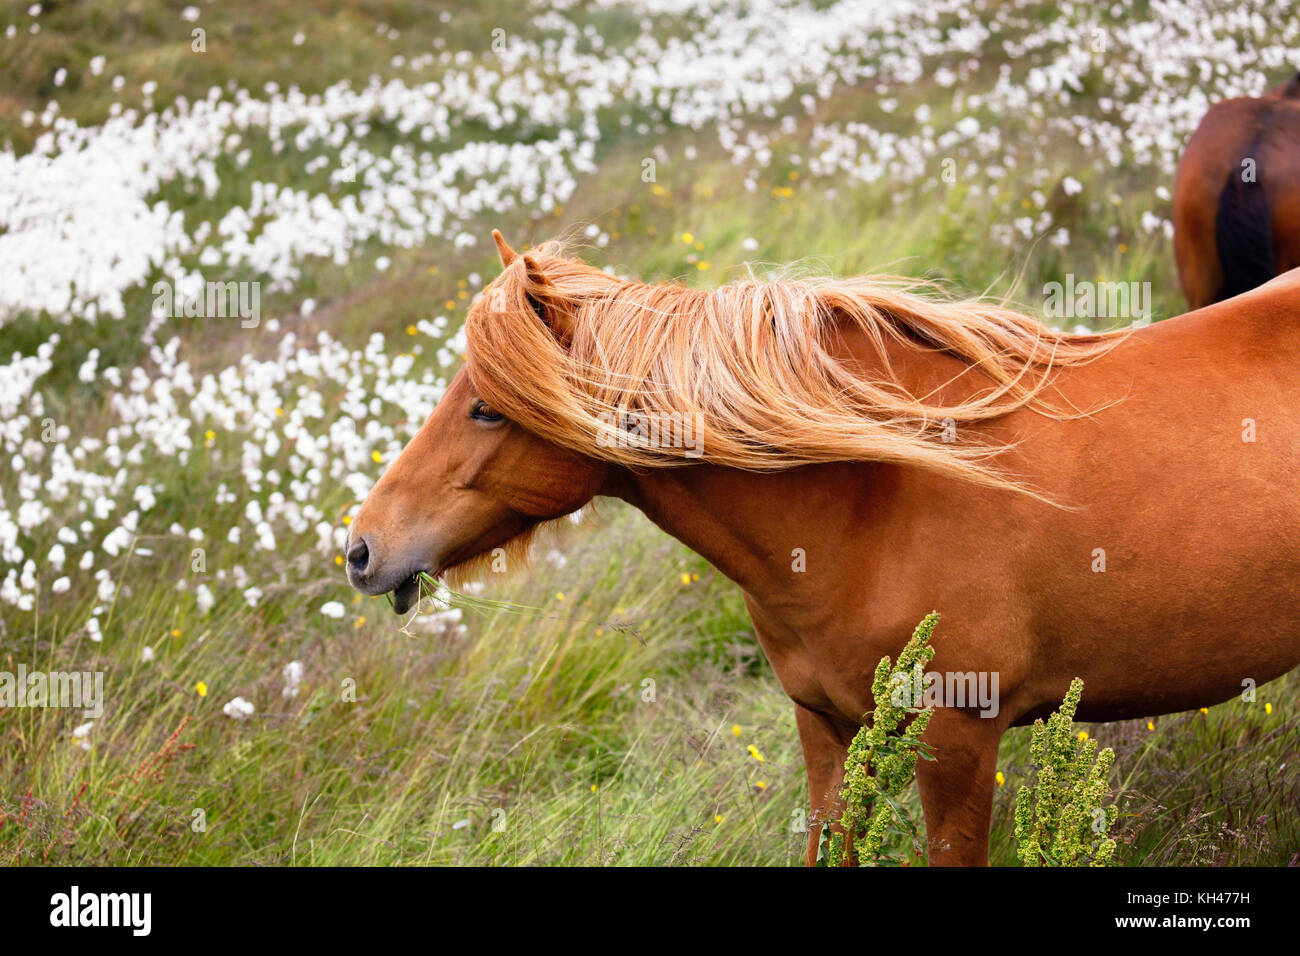 Close Up View of an Icelandic Horse Grazing in a Meadow with Wildflowers, Iceland Stock Photo